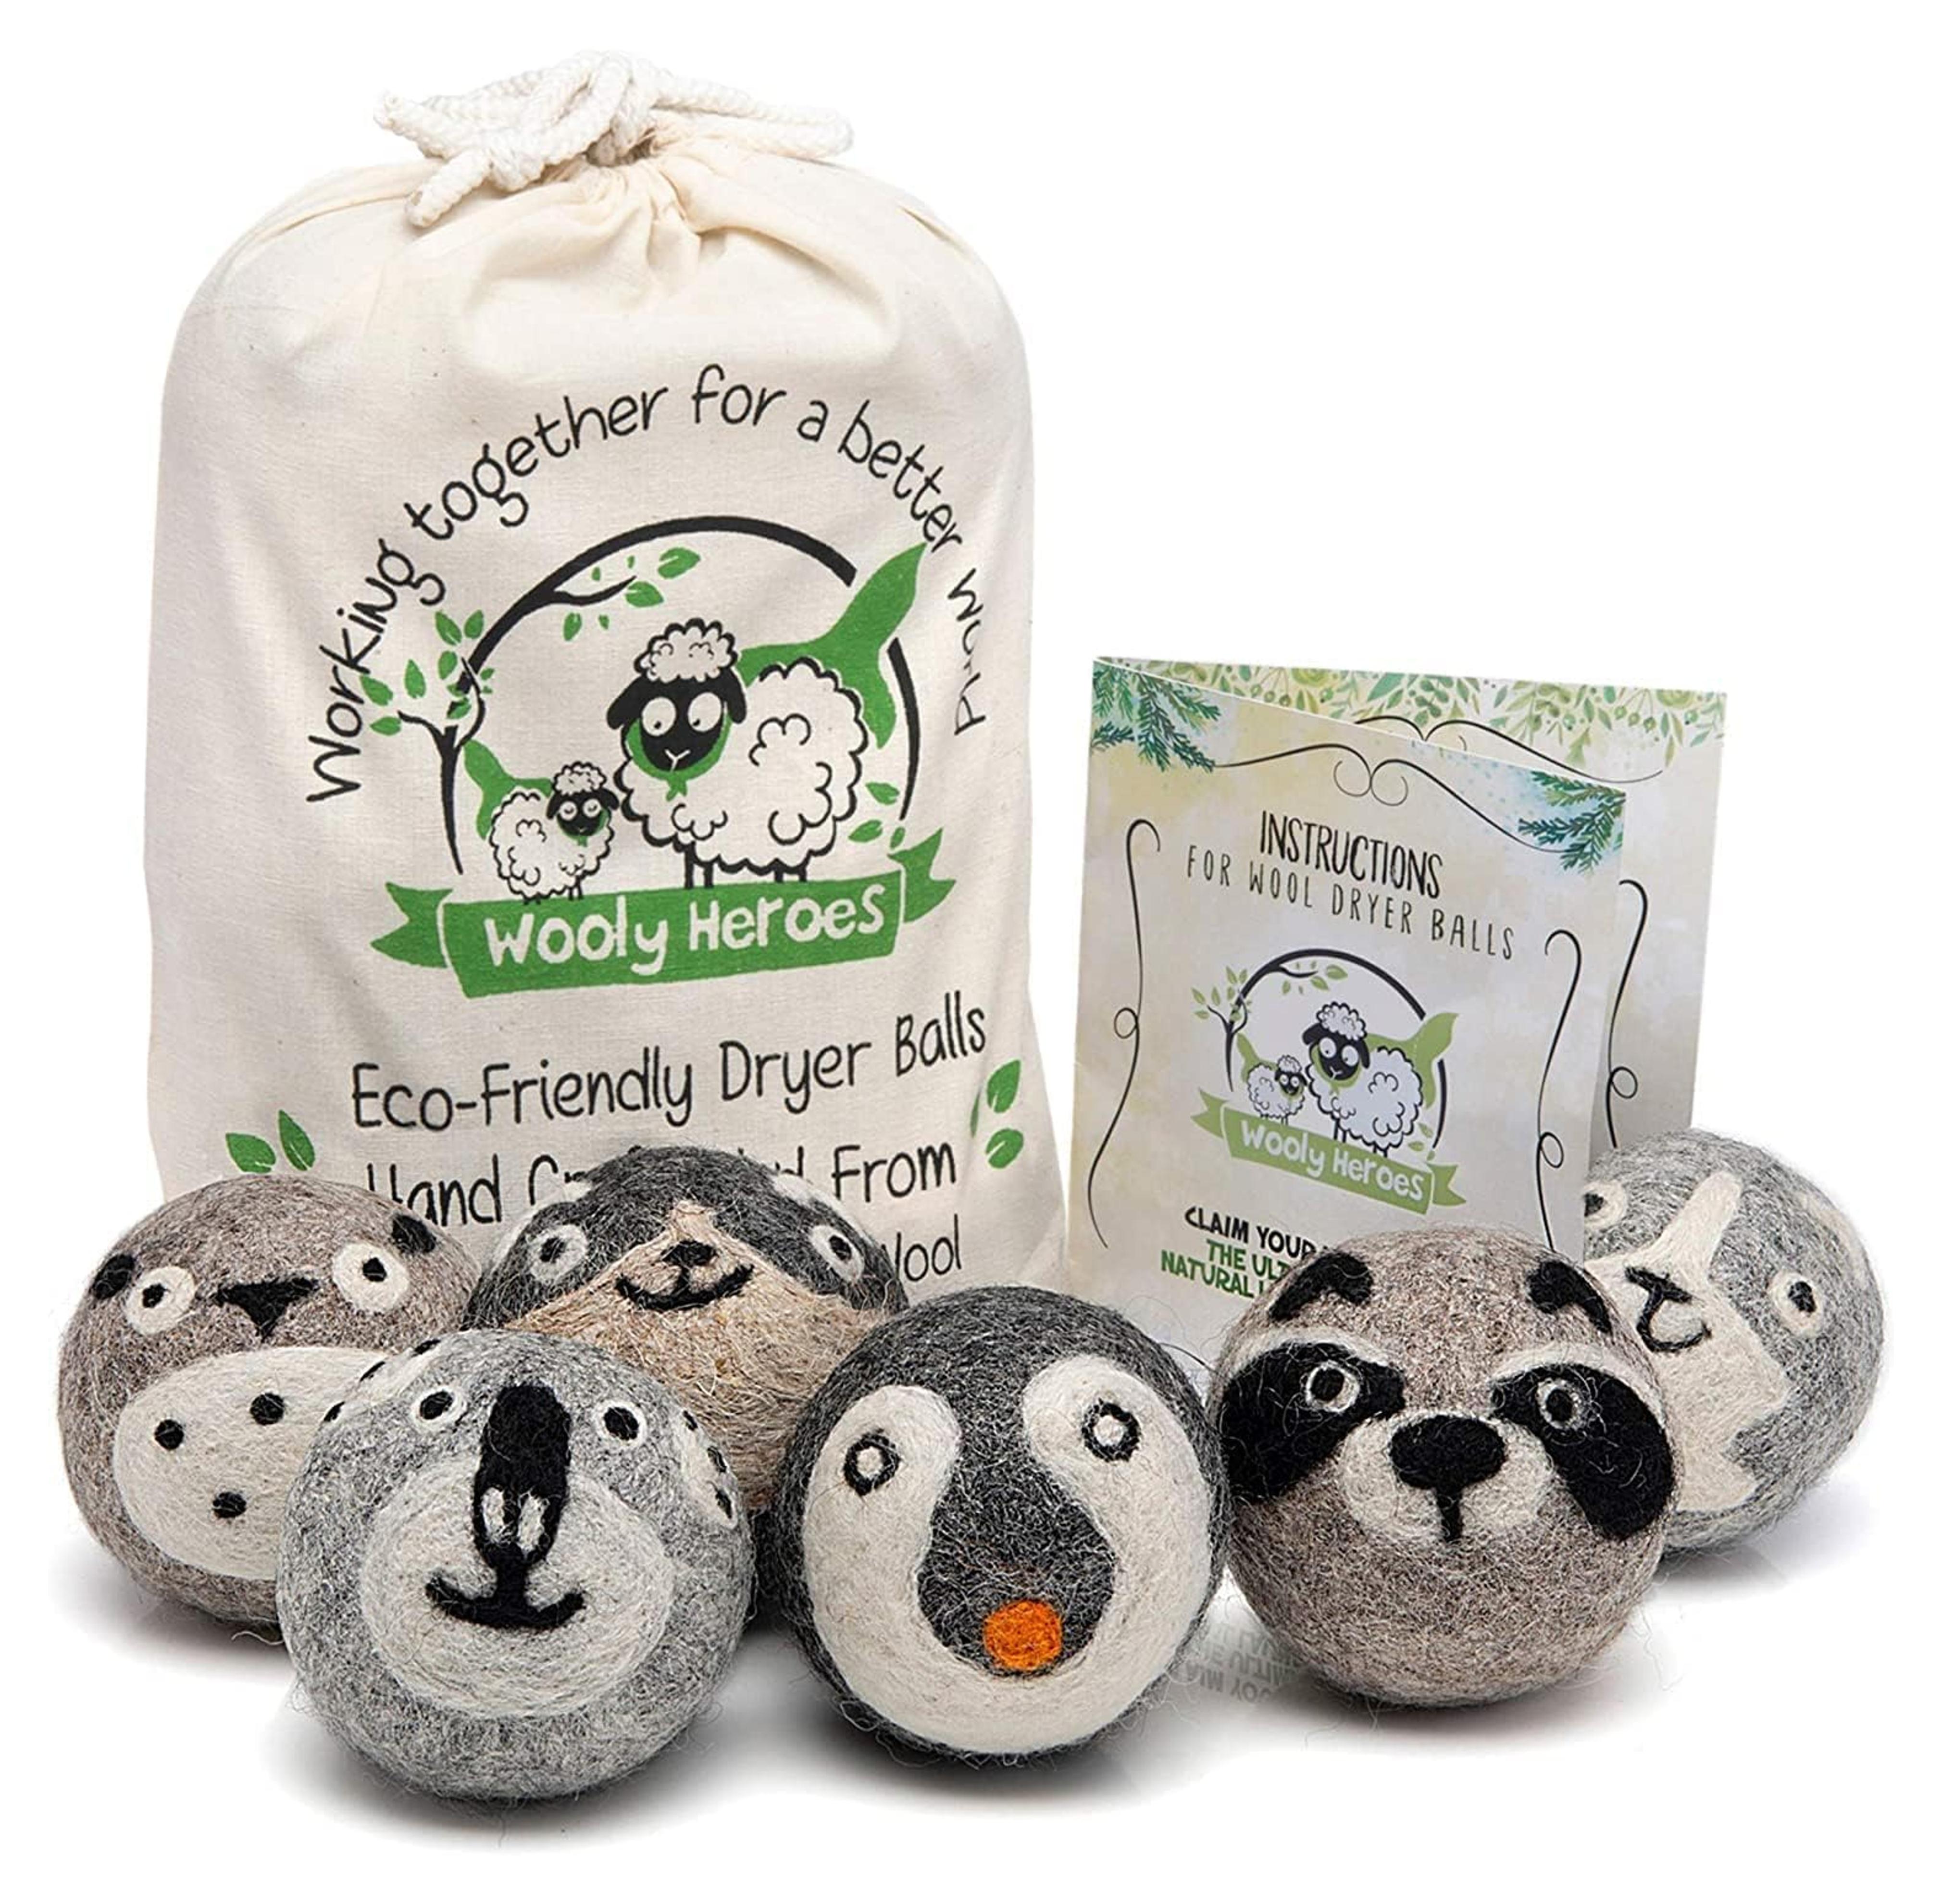 Amazon.com: Wooly Heroes Dryer Balls - 100% Organic Wool - Sustainable & Eco-Friendly - Dry 1,000 Loads : Health & Household